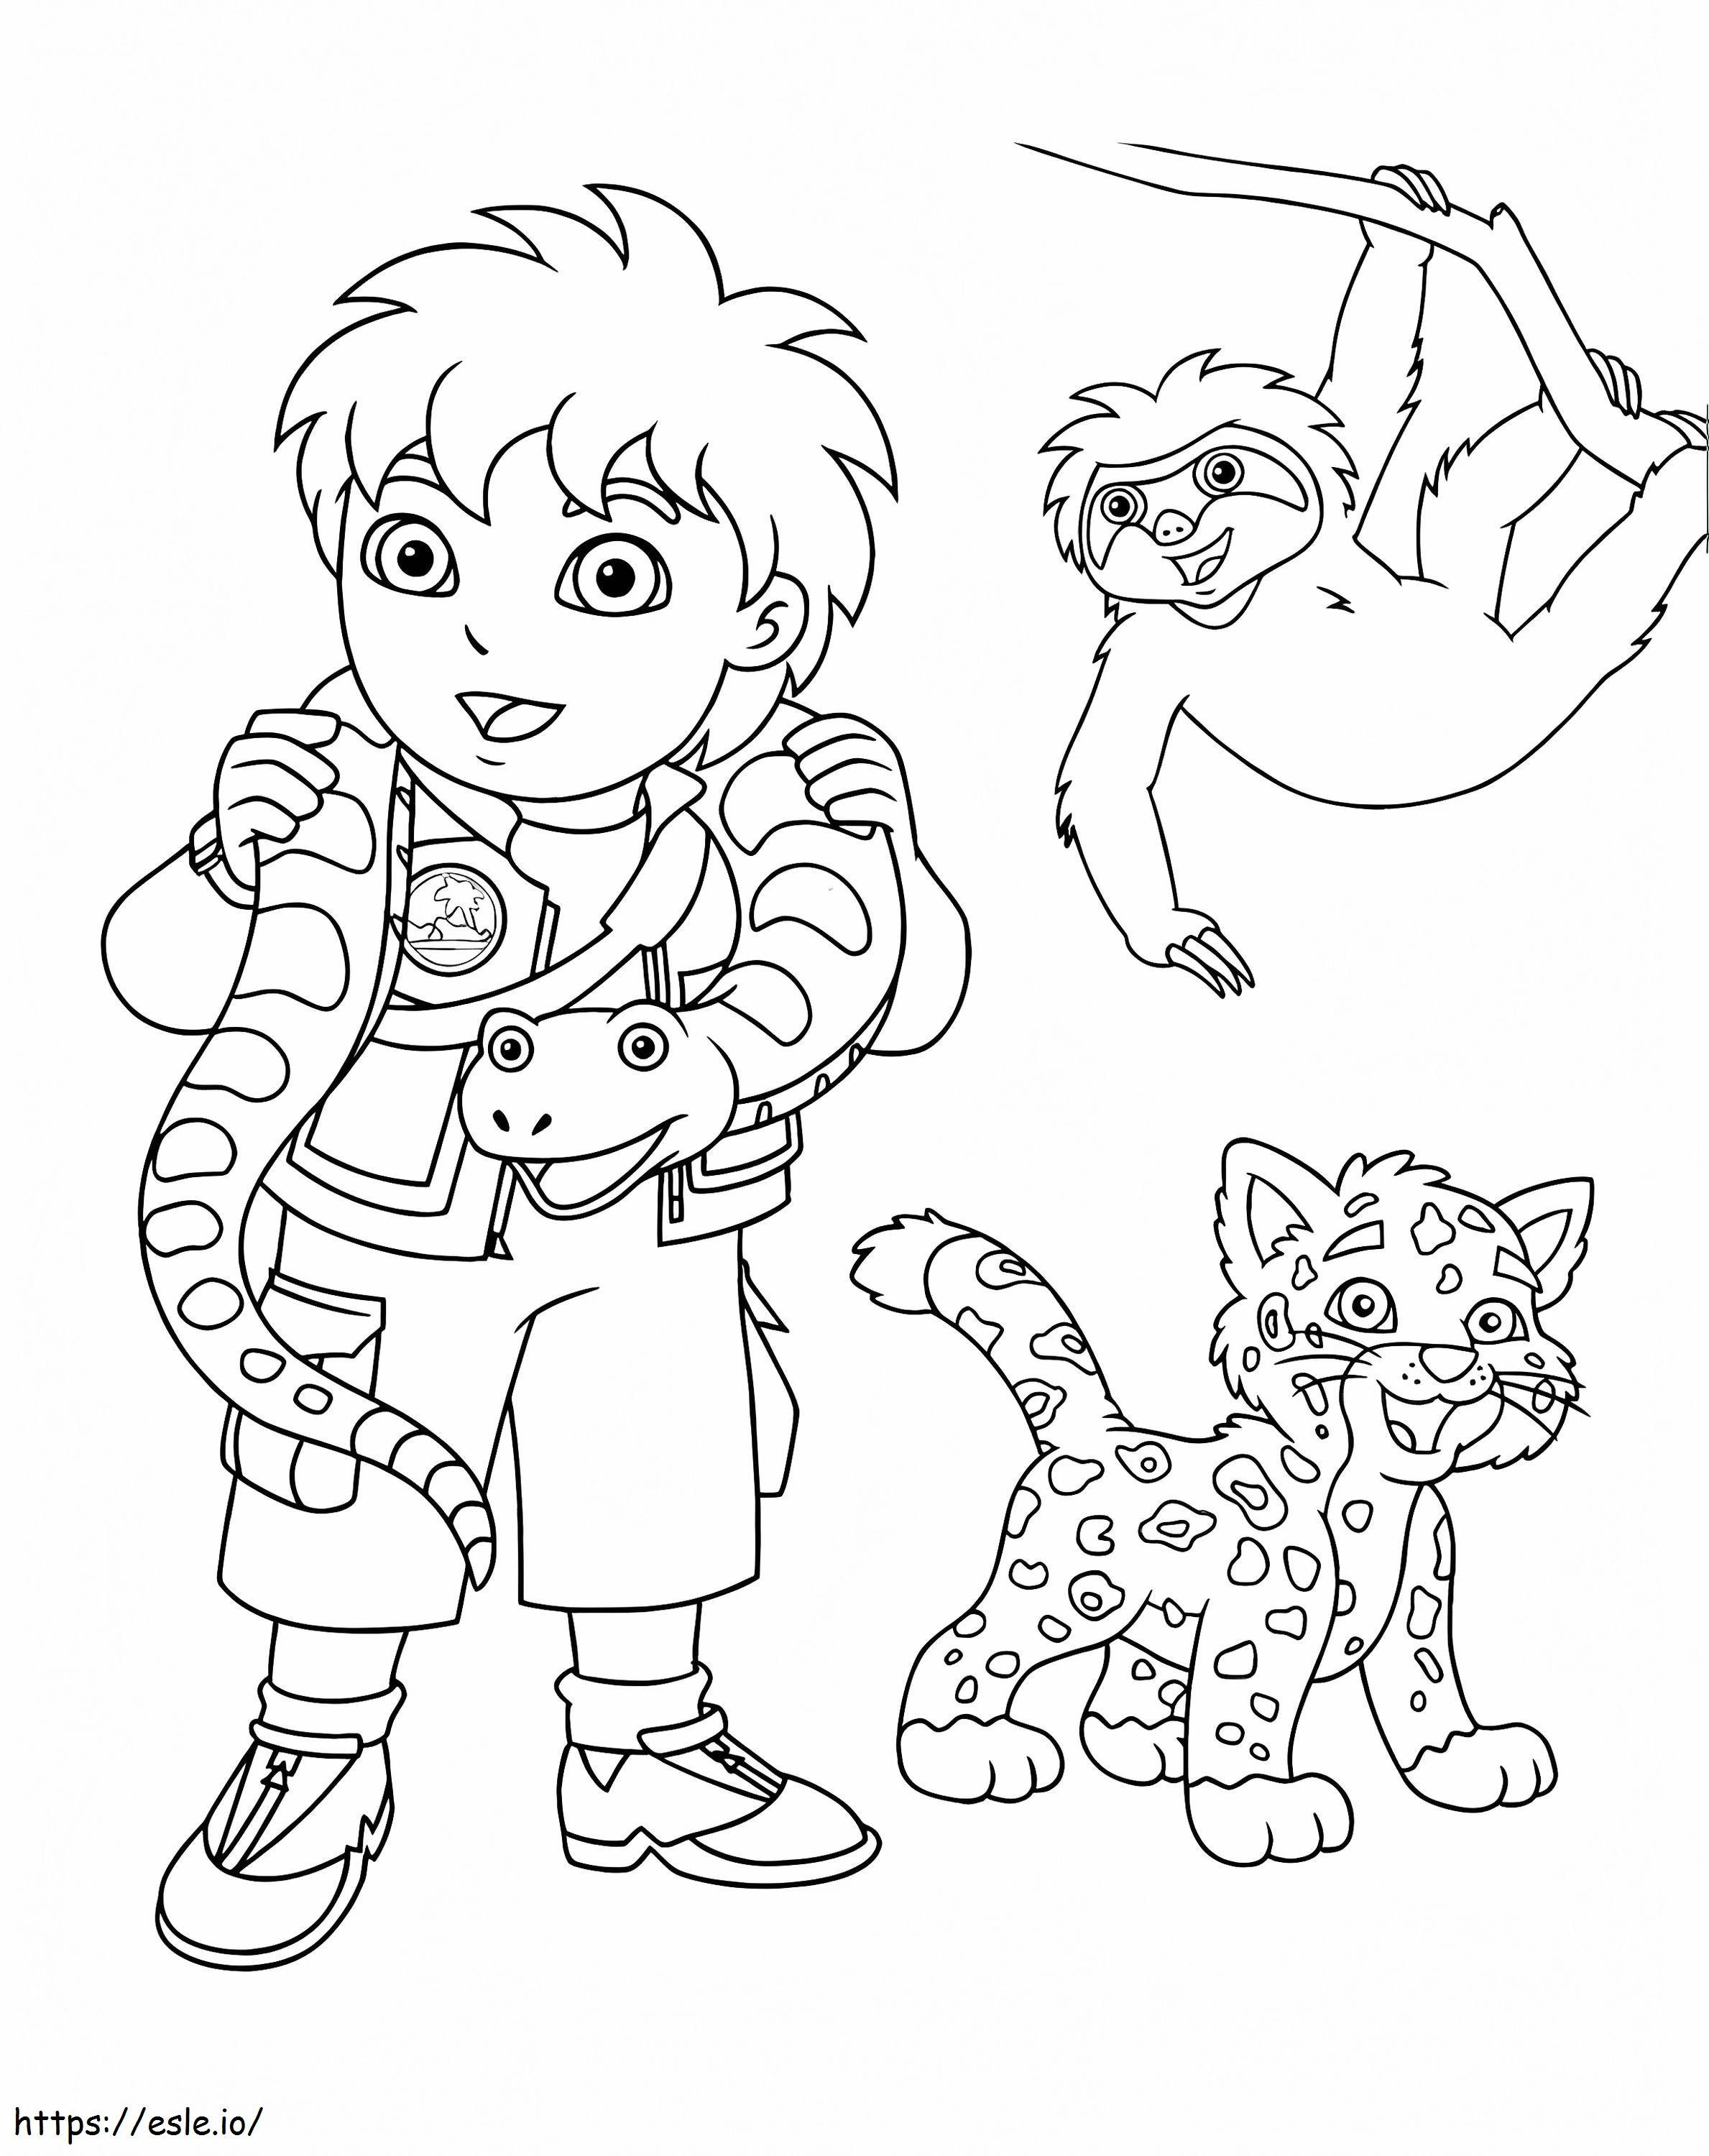 Diego And Three Animals coloring page